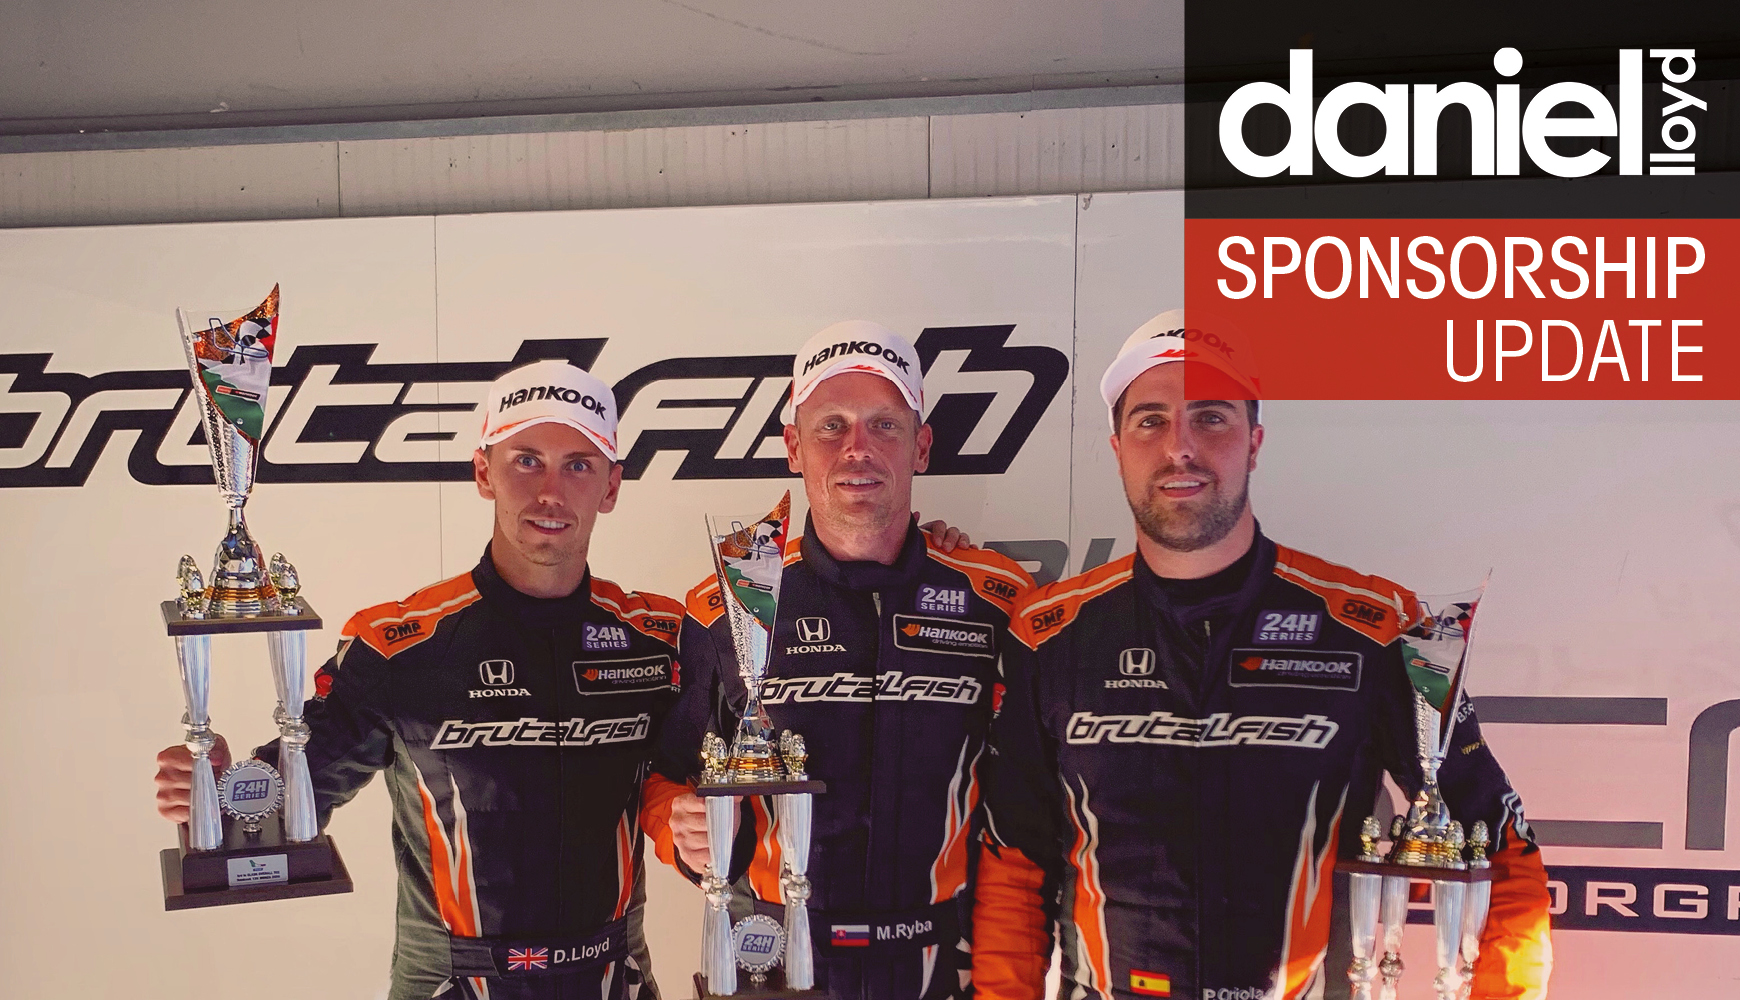 Lloyd takes pole & podium in Monza on 12h debut